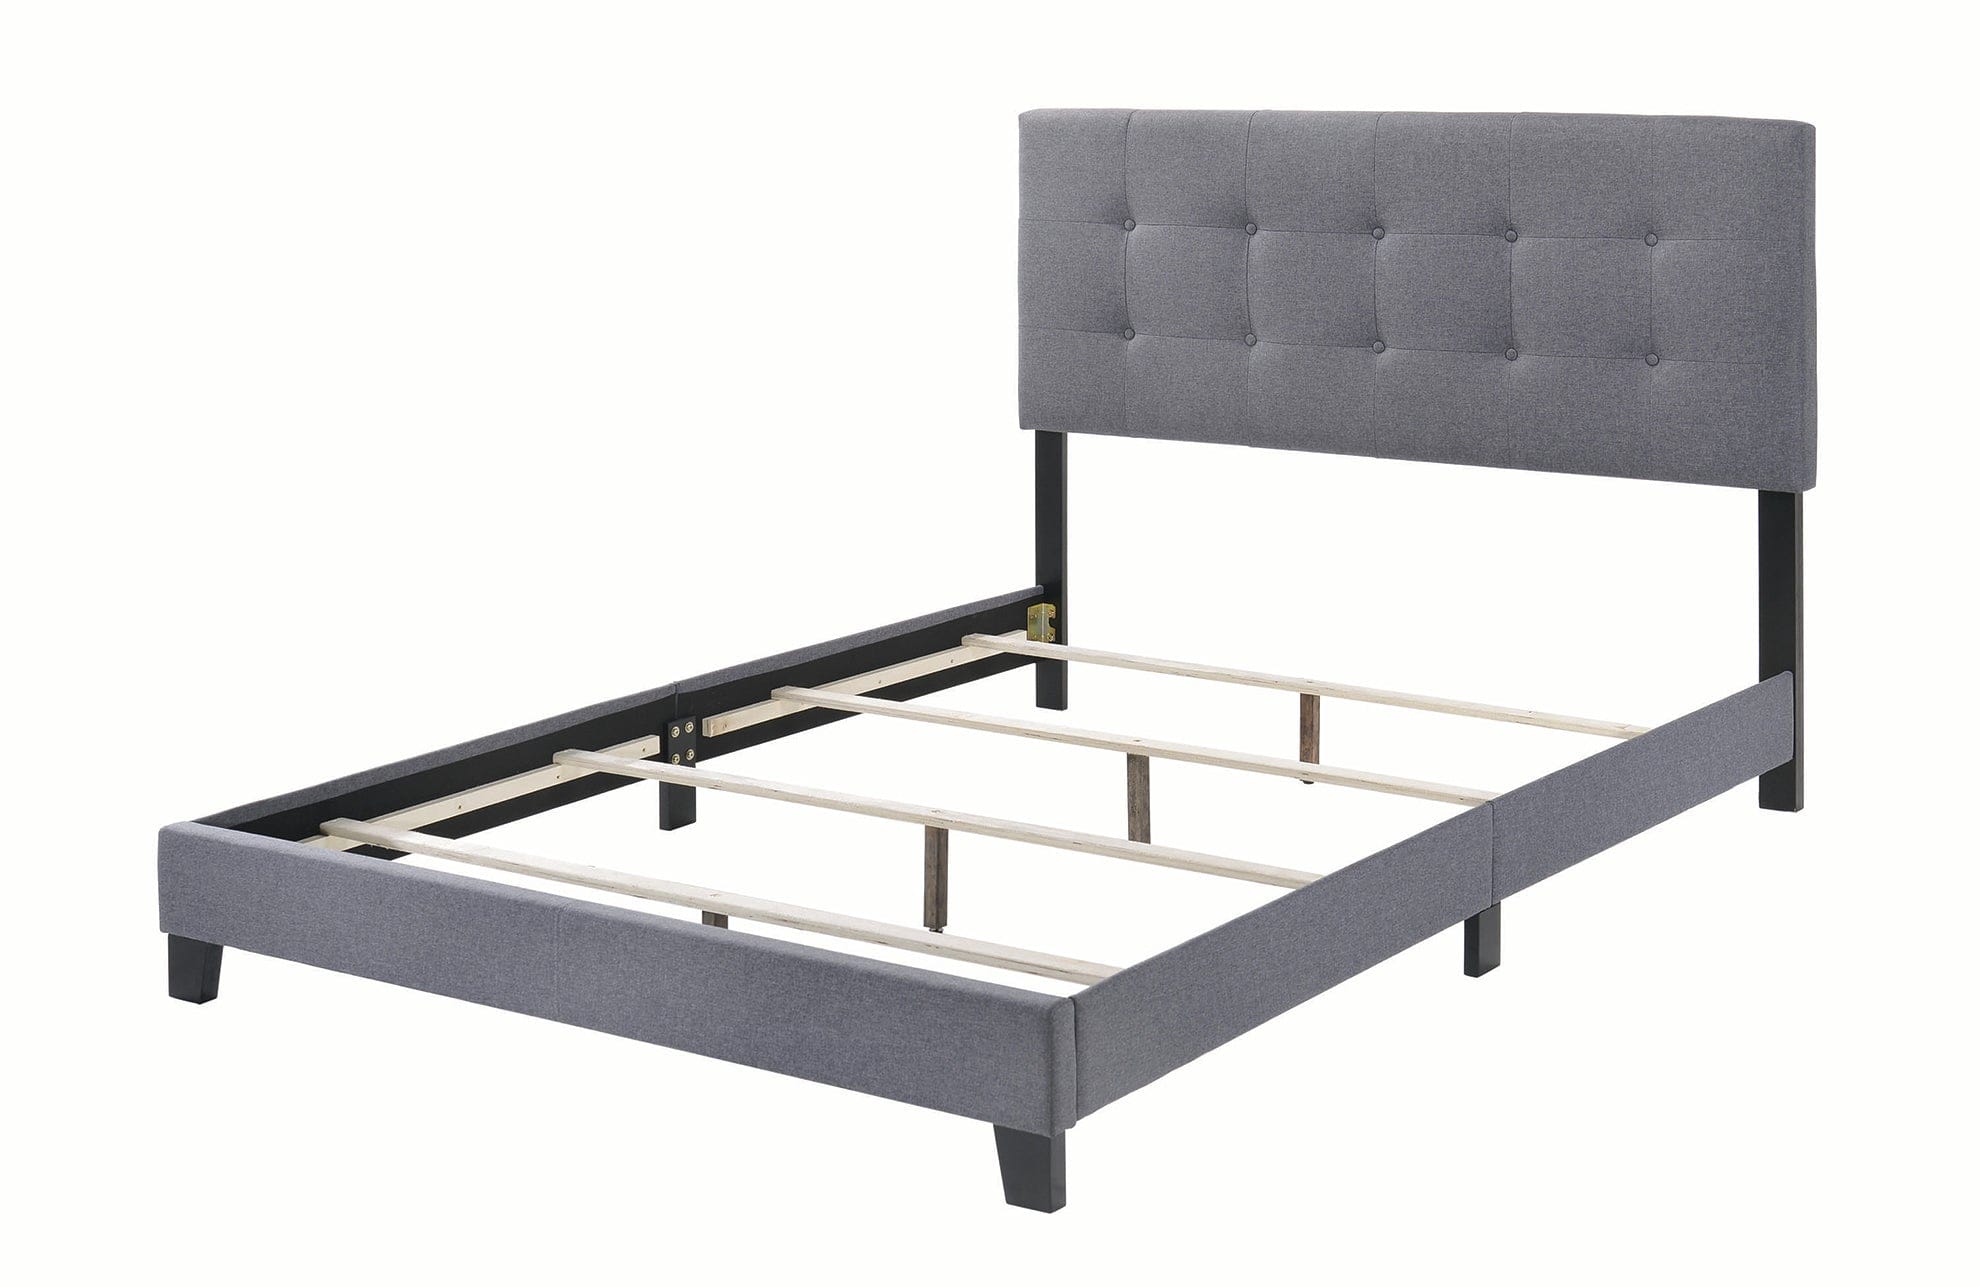 Mapes Tufted Upholstered Queen Bed Grey - 305747Q